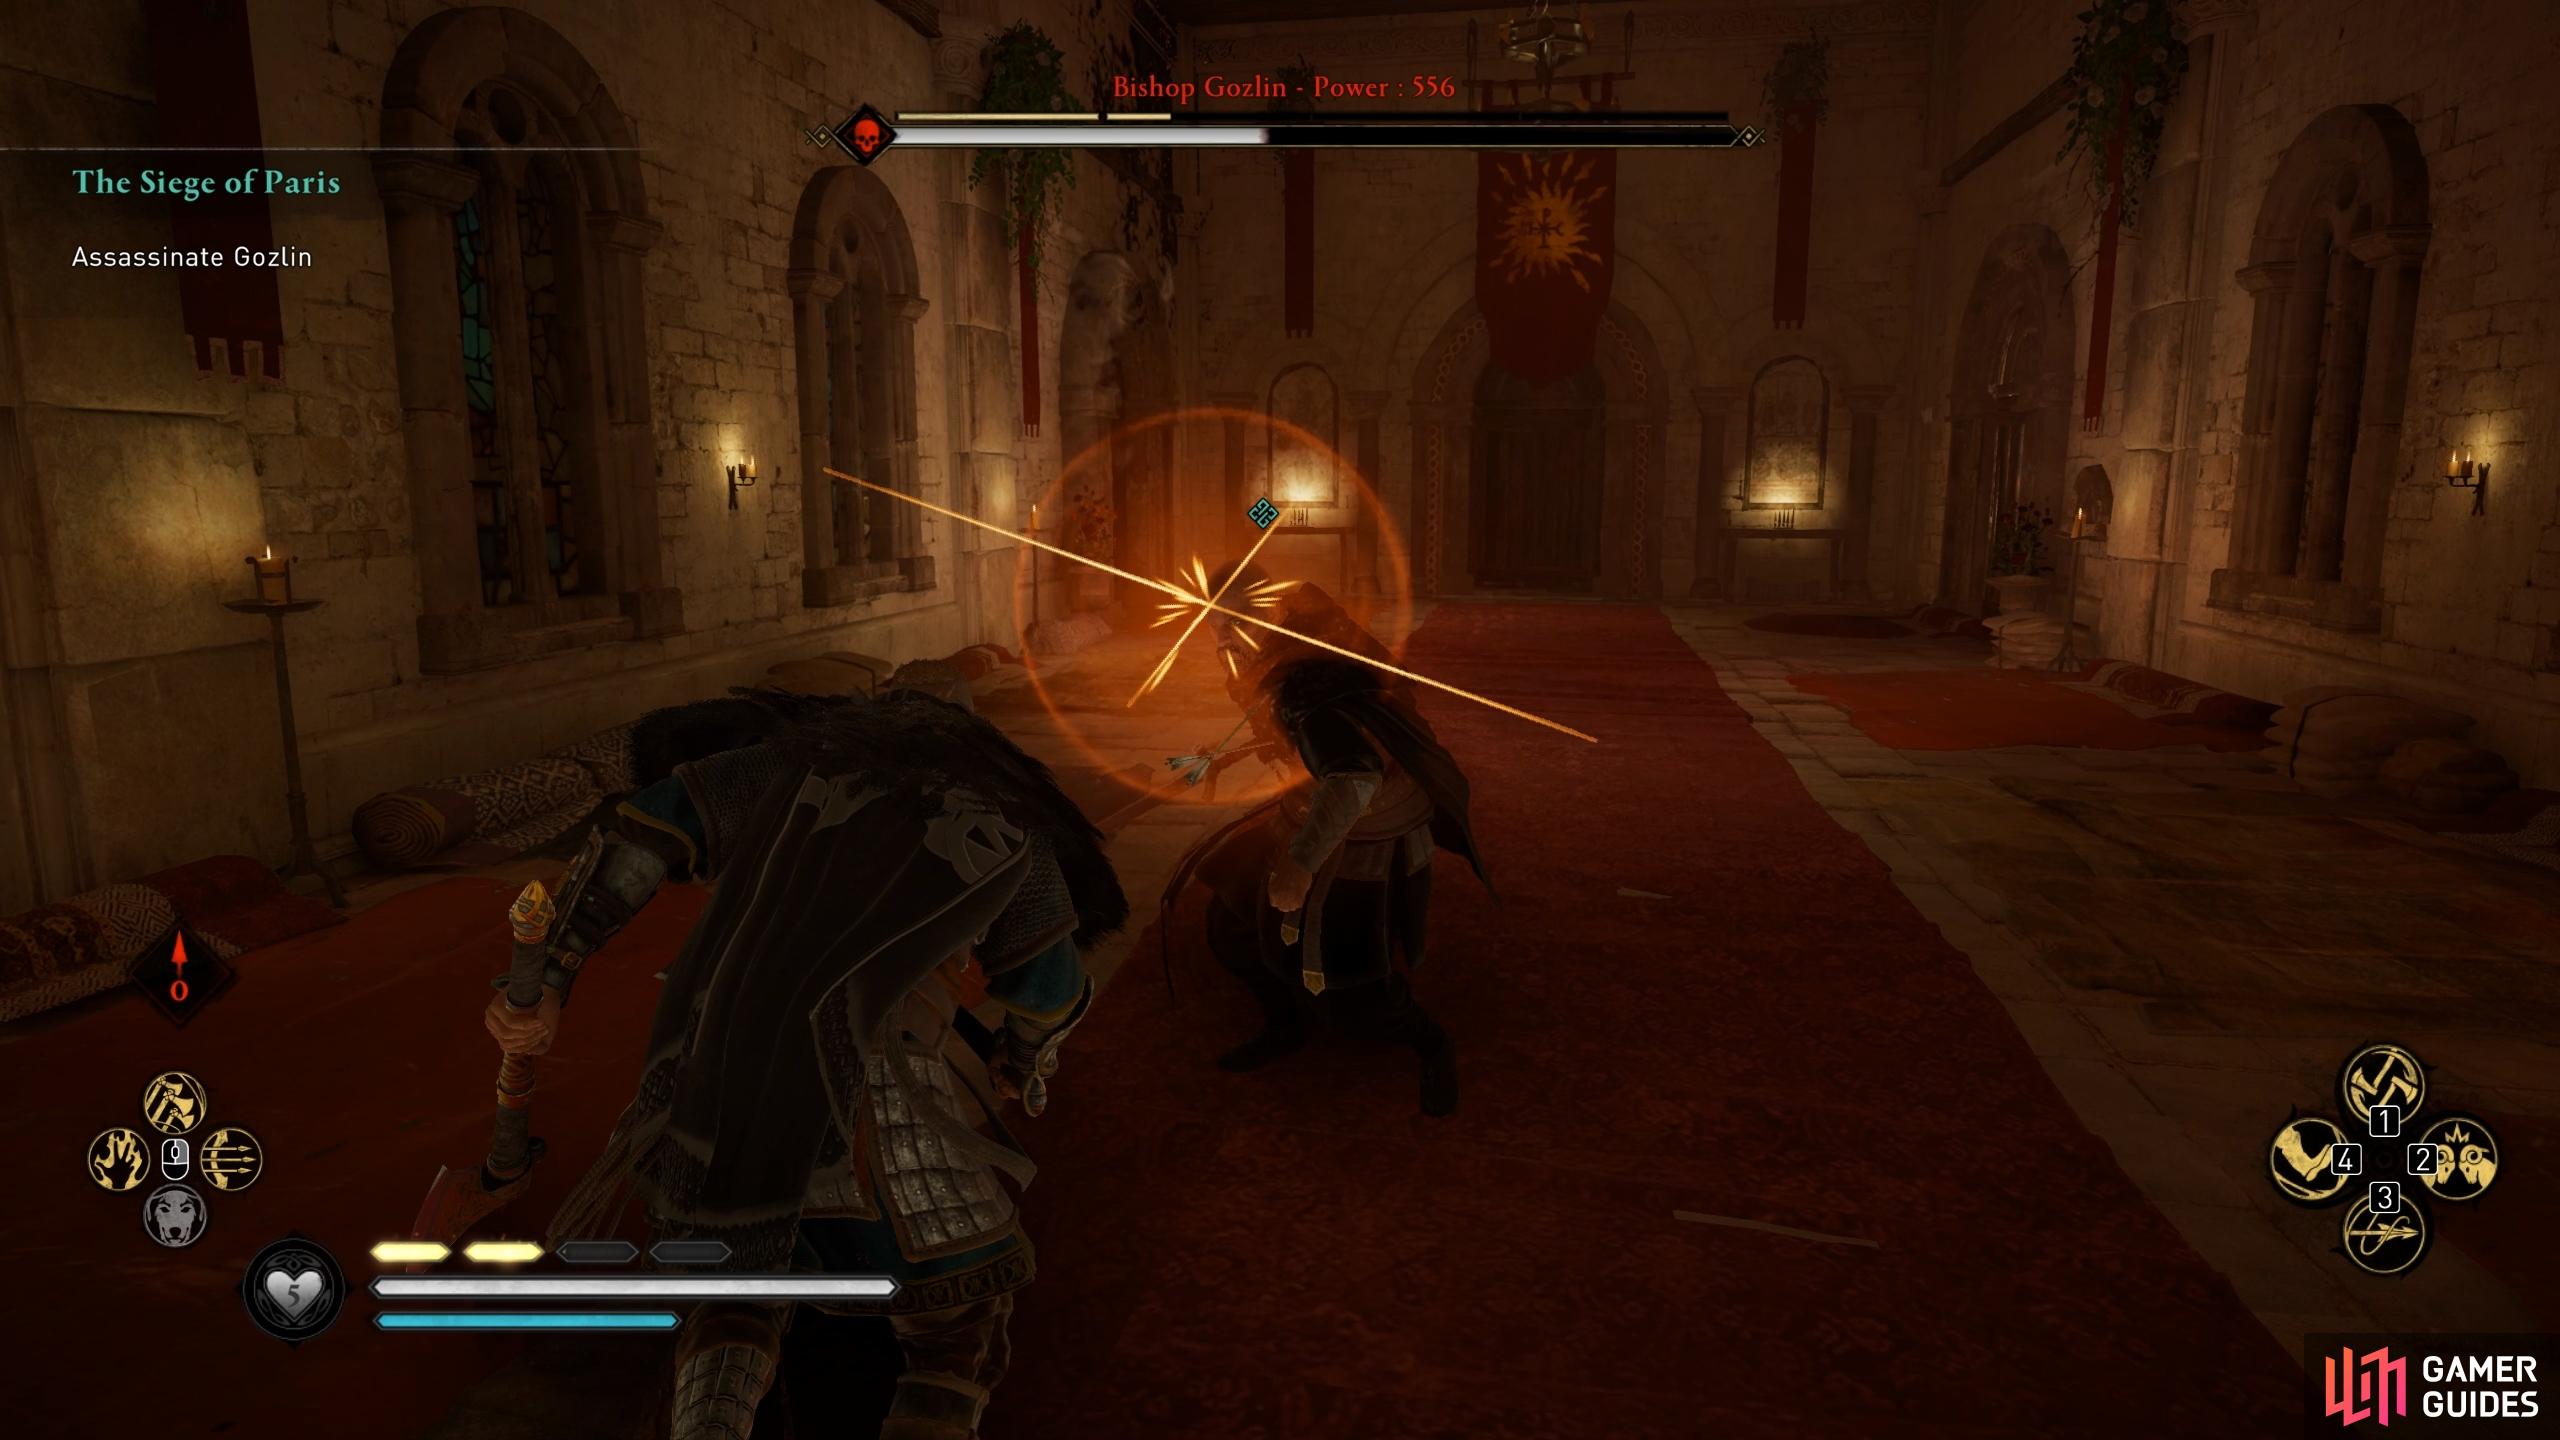 When Gozlin initiates a chain attack, you'll need to parry, block, or dodge them to avoid being hit multiple times.